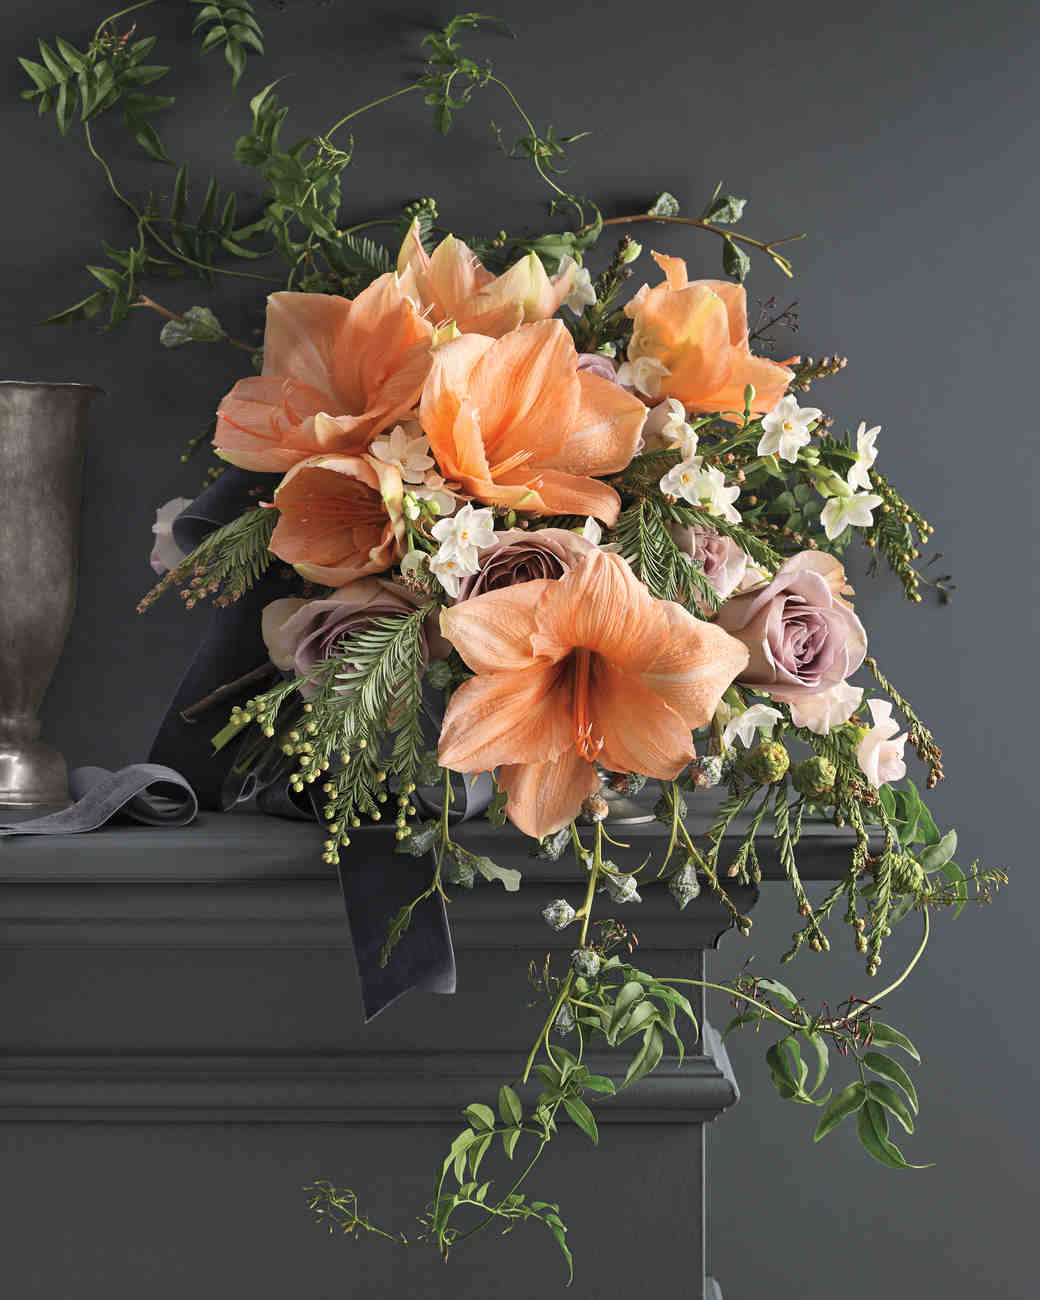 8 Bouquets Inspired by the Most Popular Wedding Flowers | Martha ...